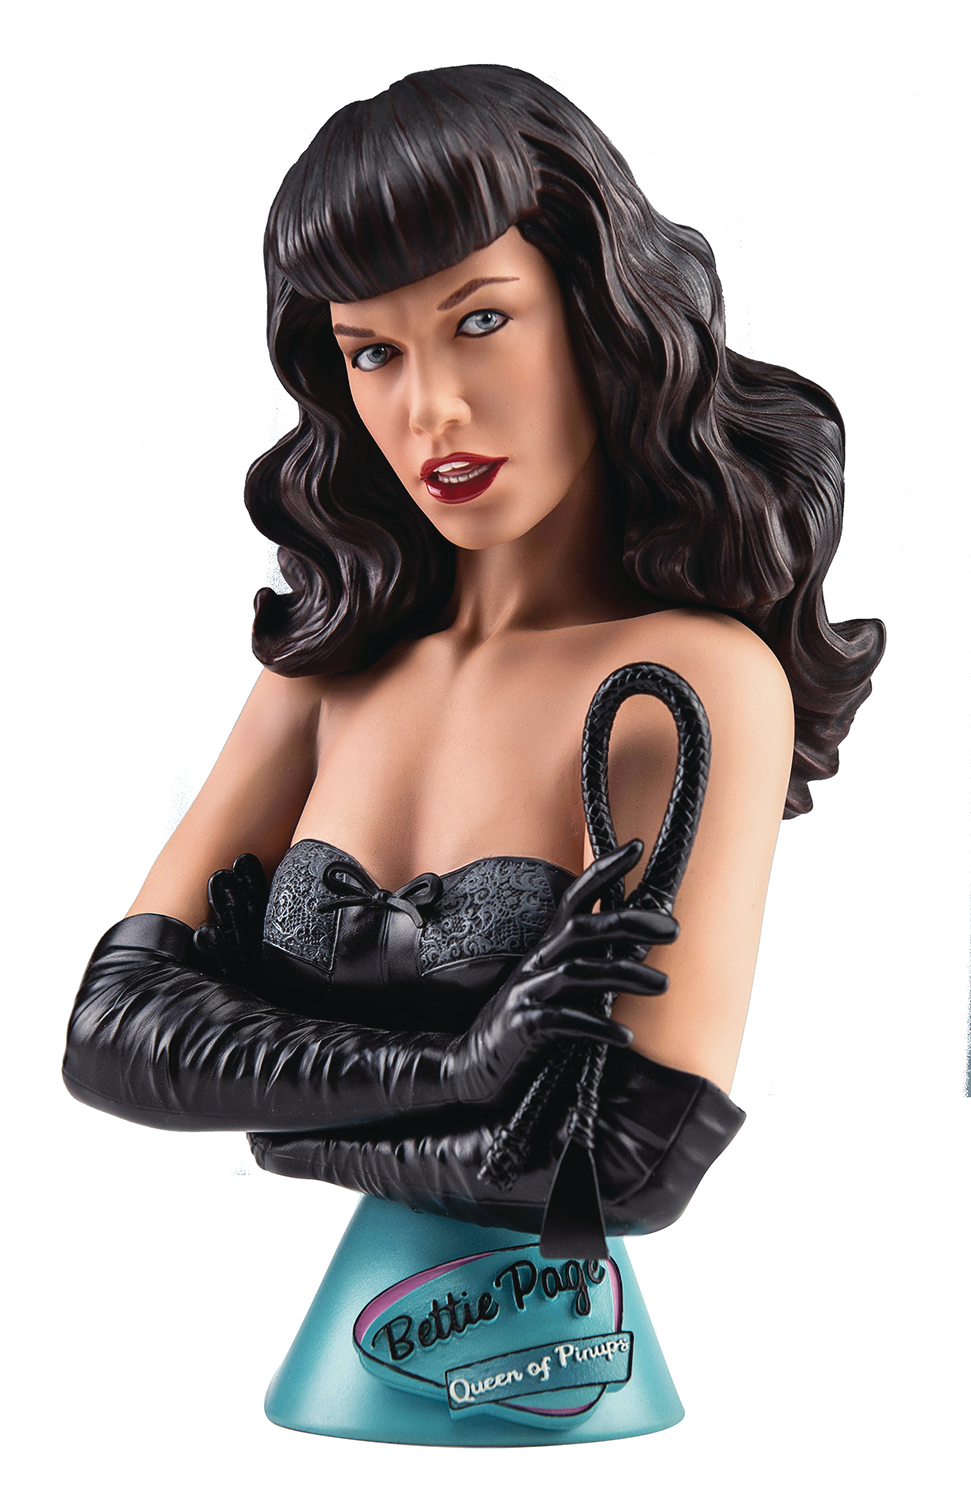 Bettie Page V2 Queen of Pinups 3/4 Bust (Naughty Bettie)